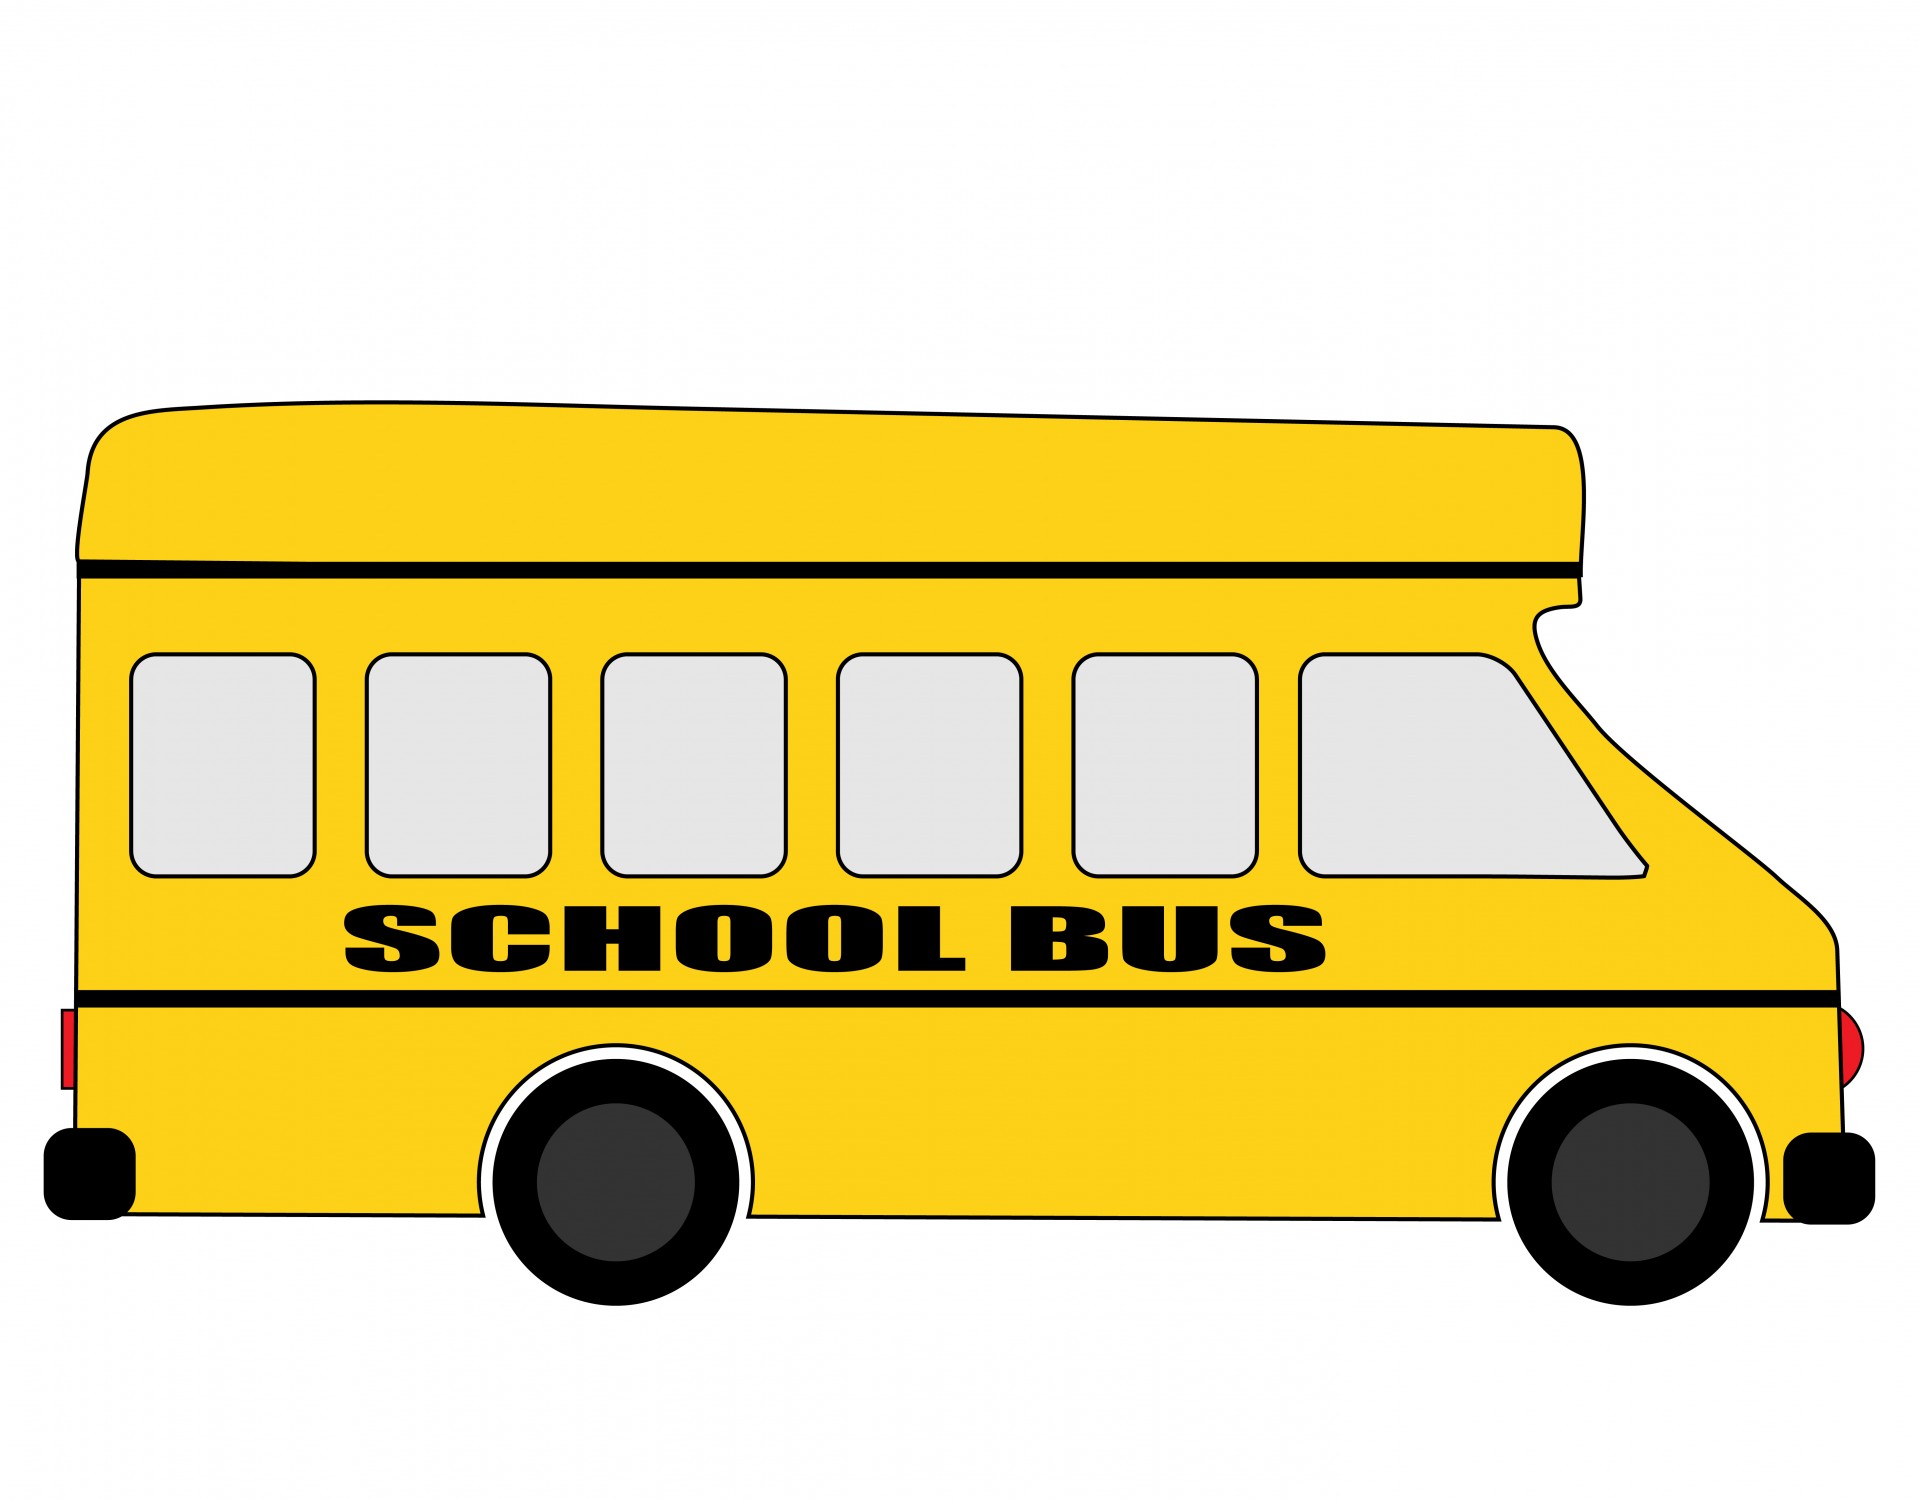 School bus clipart yellow outline only